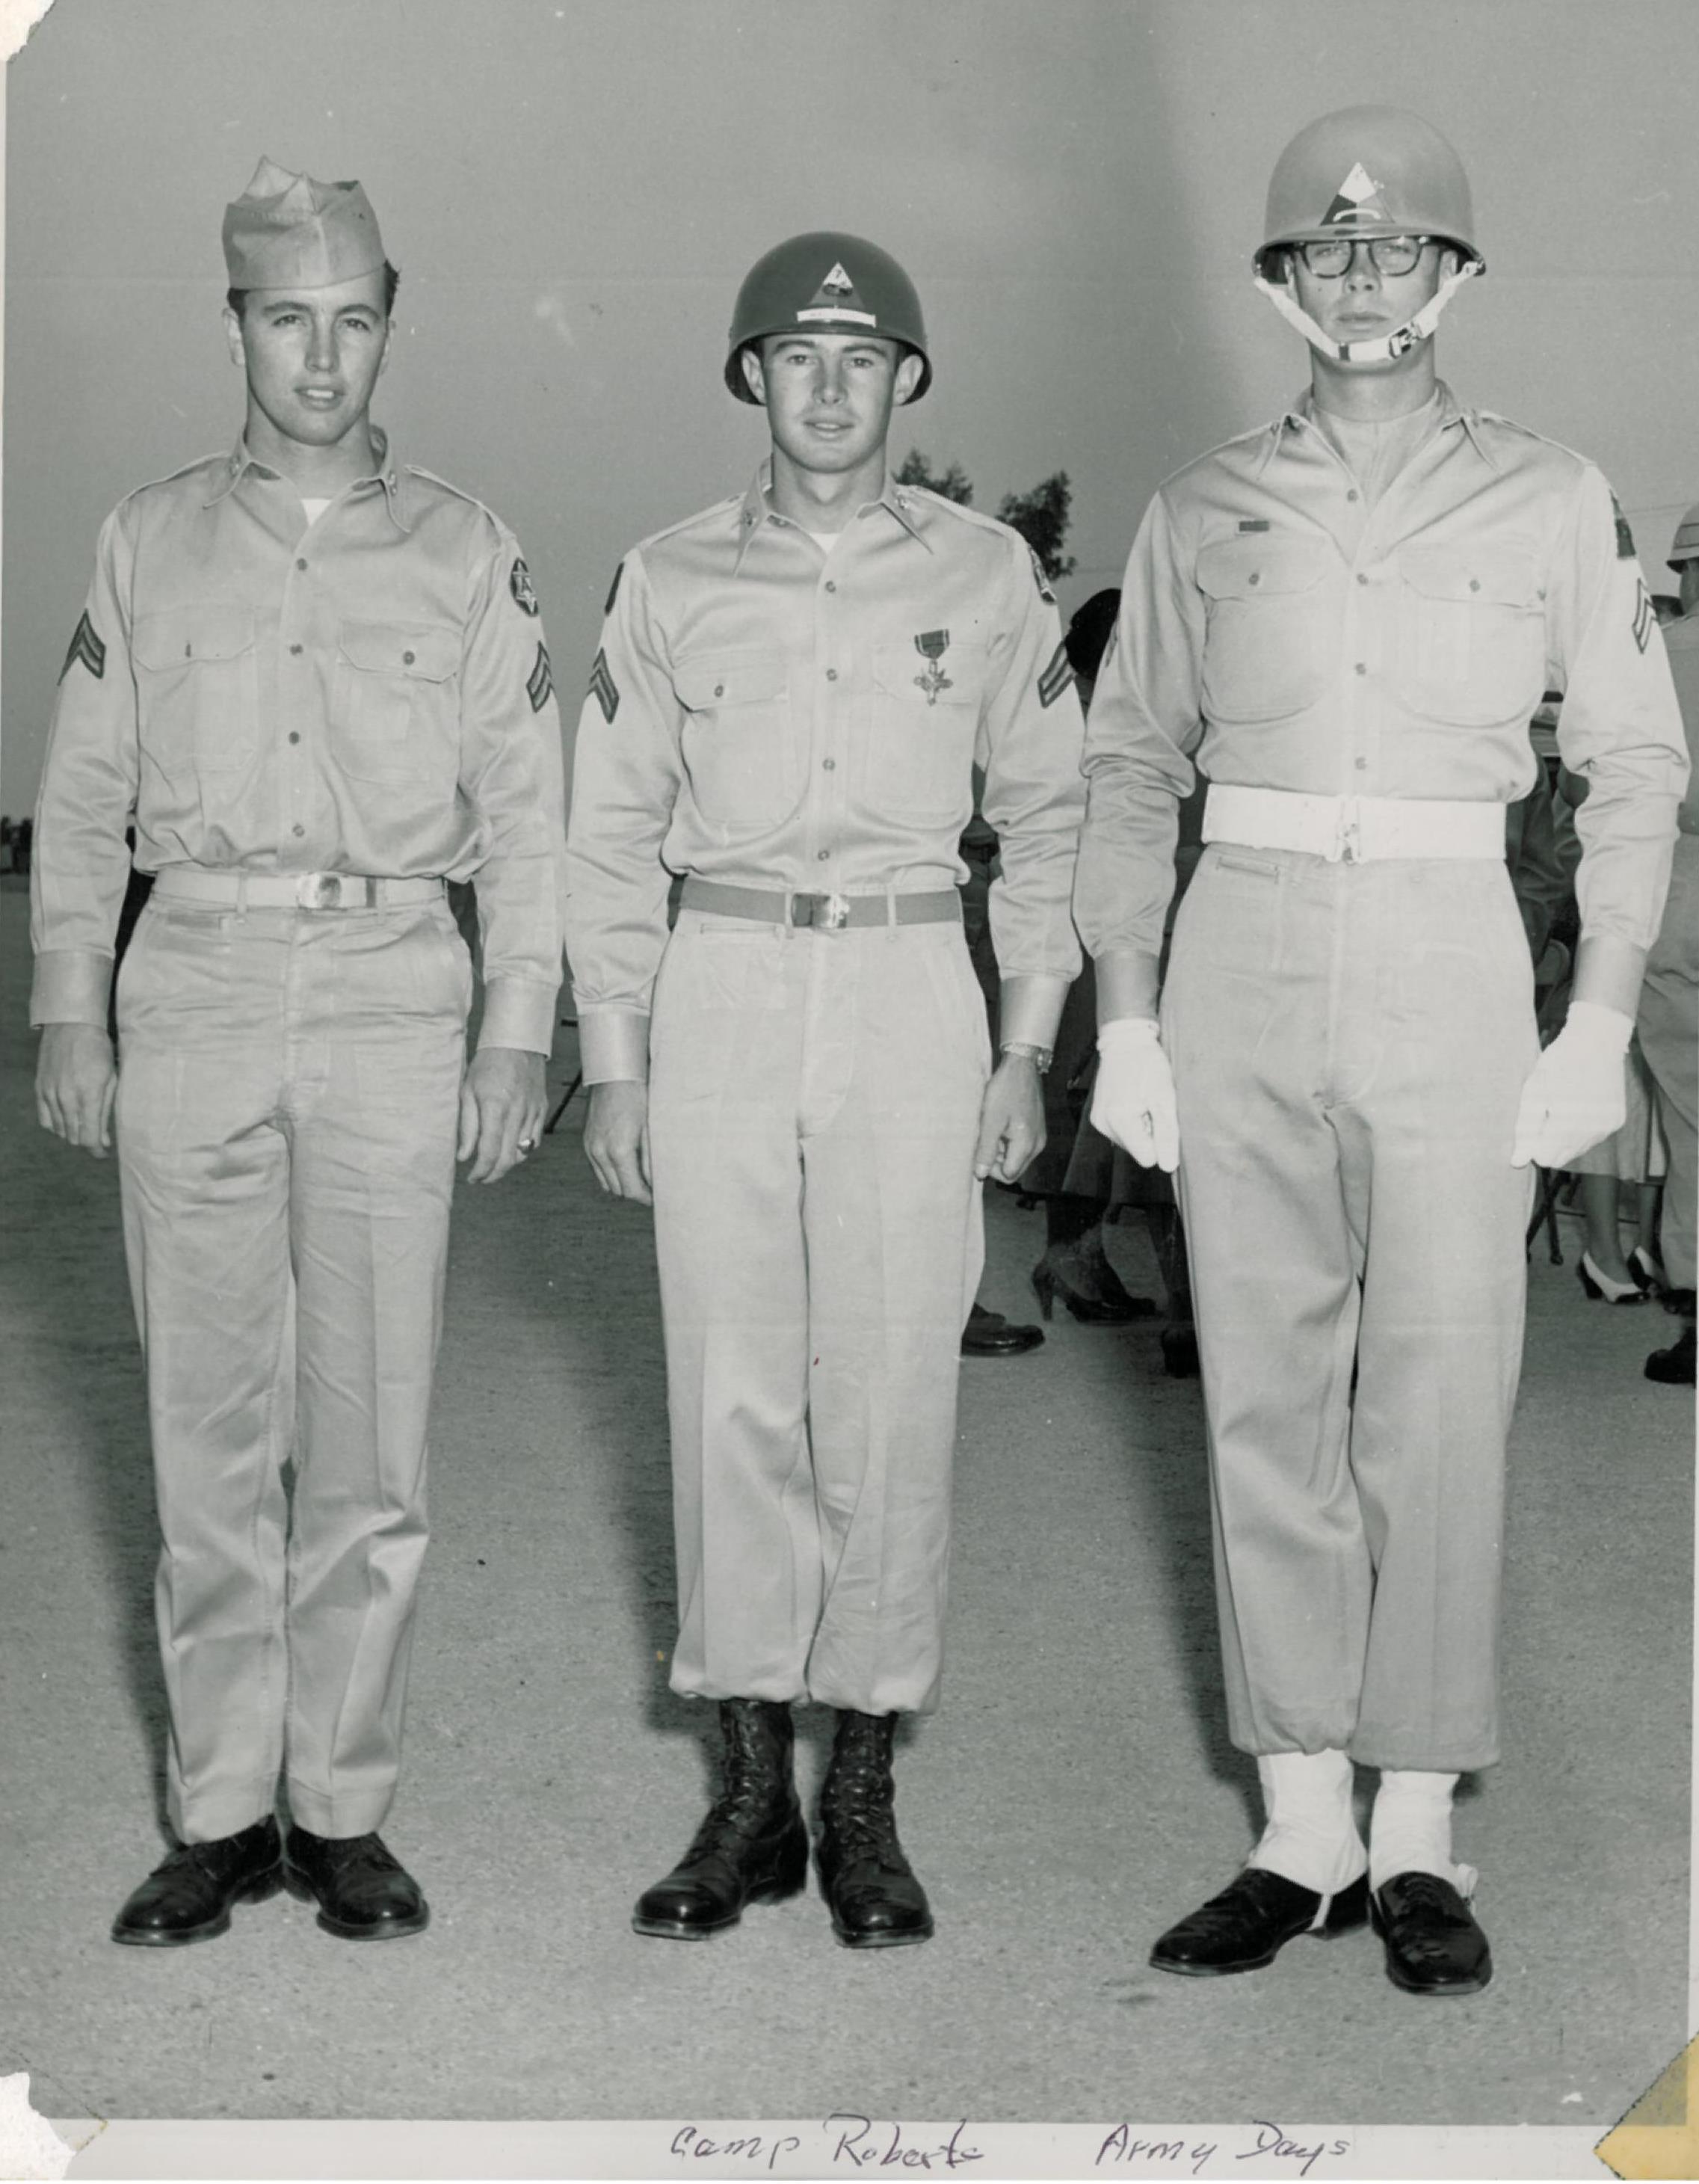  Camp Roberts, Calif., c. 1951-1952.  This photo MAY have appeared in  The Camp Roberts Parade , Vol. 3 #1, Thursday, Oct. 16, 1952.  Corporal Norman McCloud (center) was awarded the Distinguished Service Cross by Secretary of the Army Frank Pace, Jr